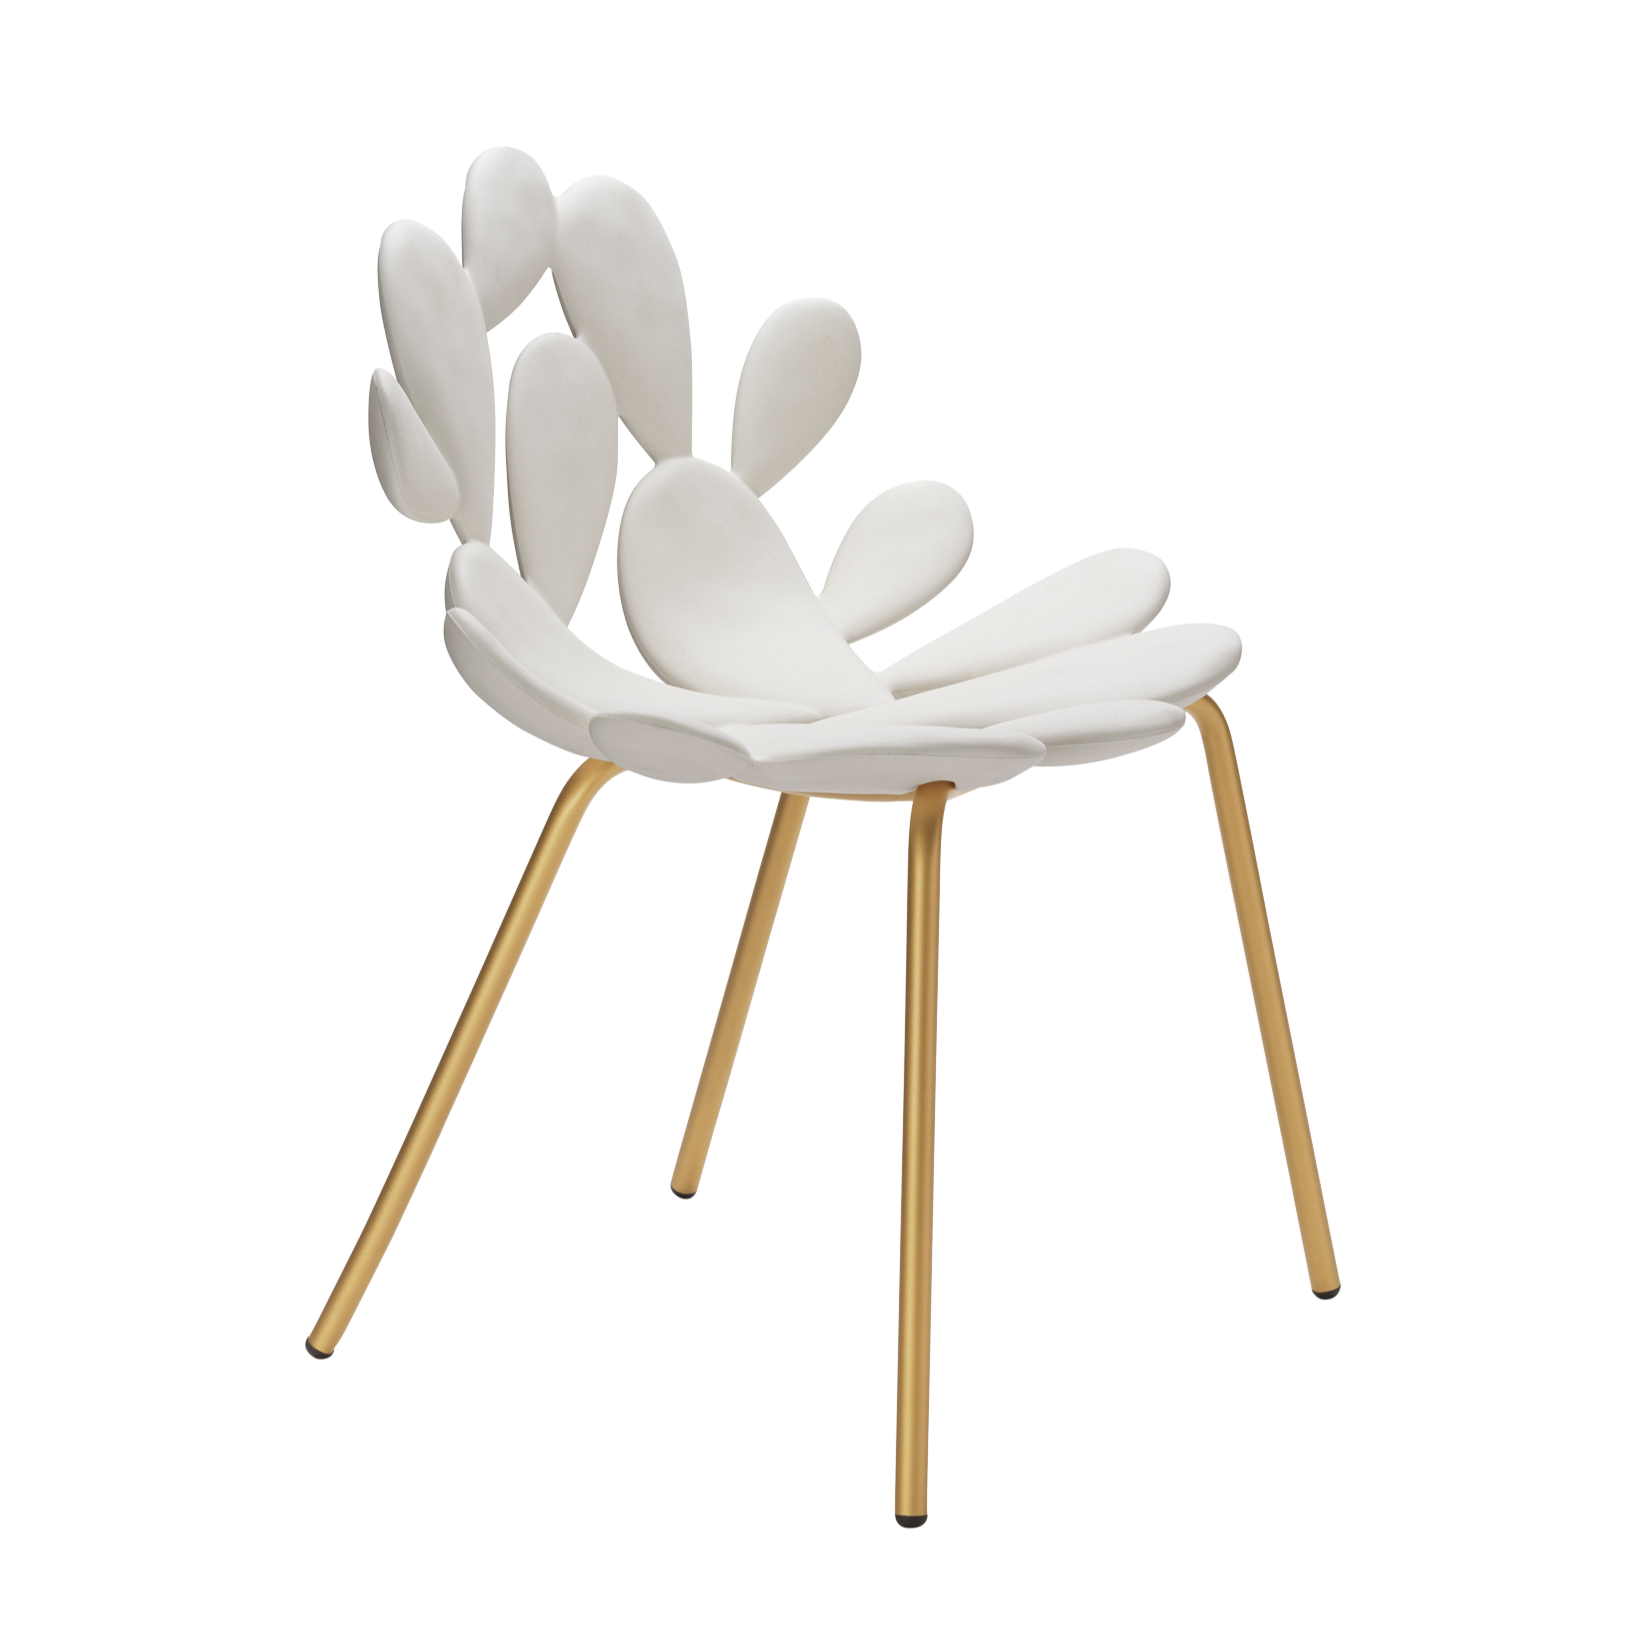 After the success of the Filicudi Maractionono chair, he designs a new element belonging to the same family for Qeeboo. The Filicudi chair is a new Qeebooo chair, suitable for interiors and outside, which can recreate Mediterranean magic in our daily spaces.